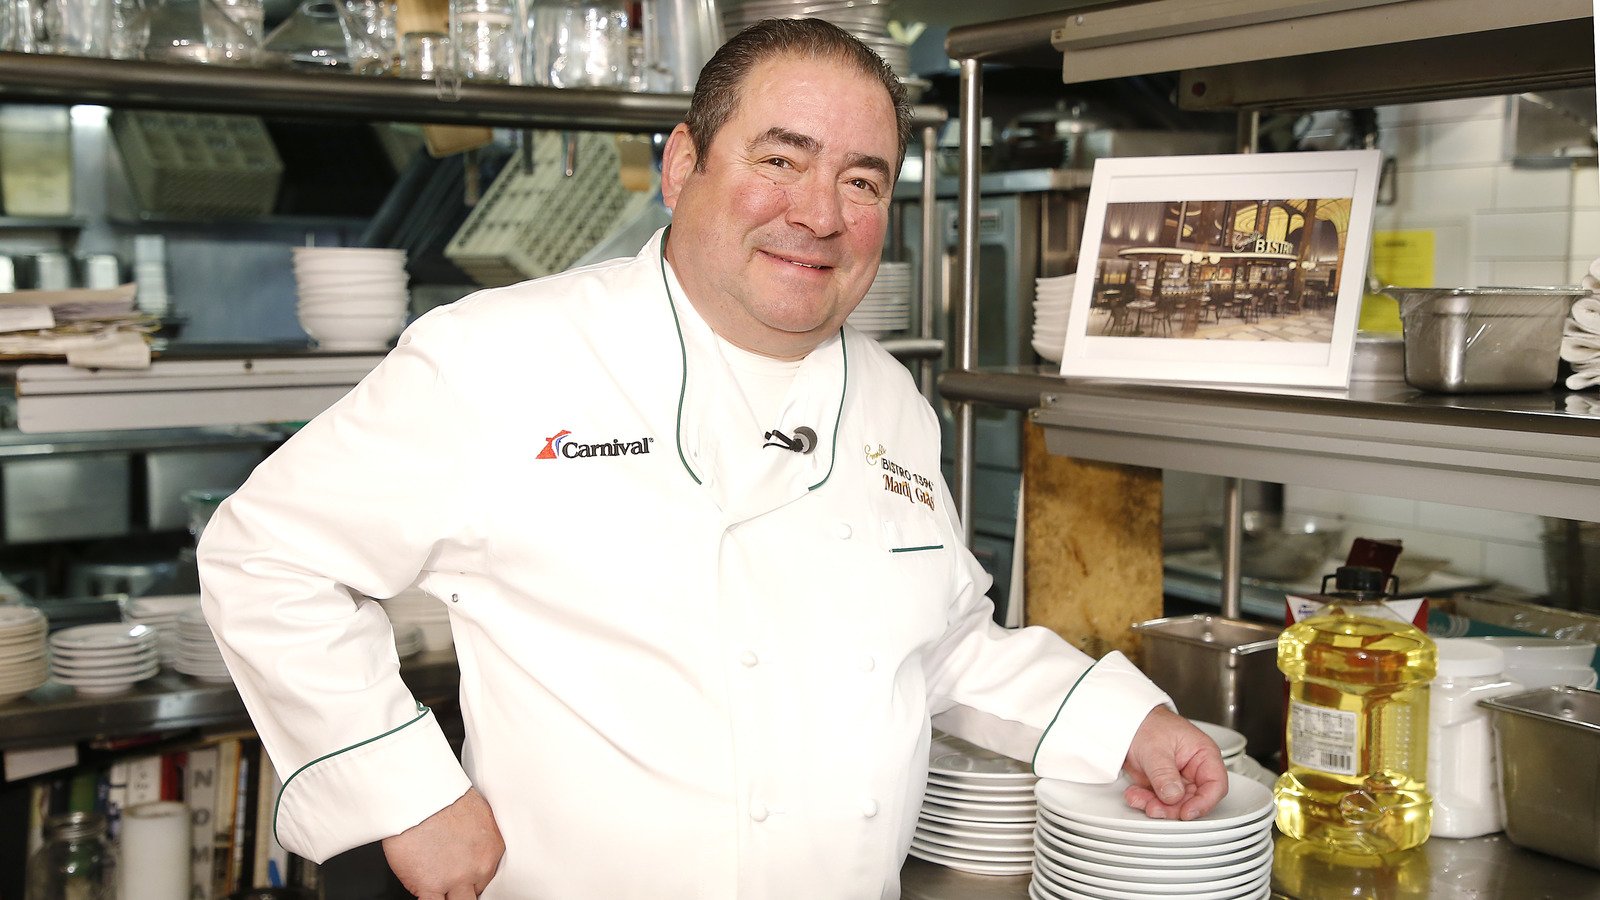 The One Recipe Emeril Lagasse Wishes We All Forgot - Mashed